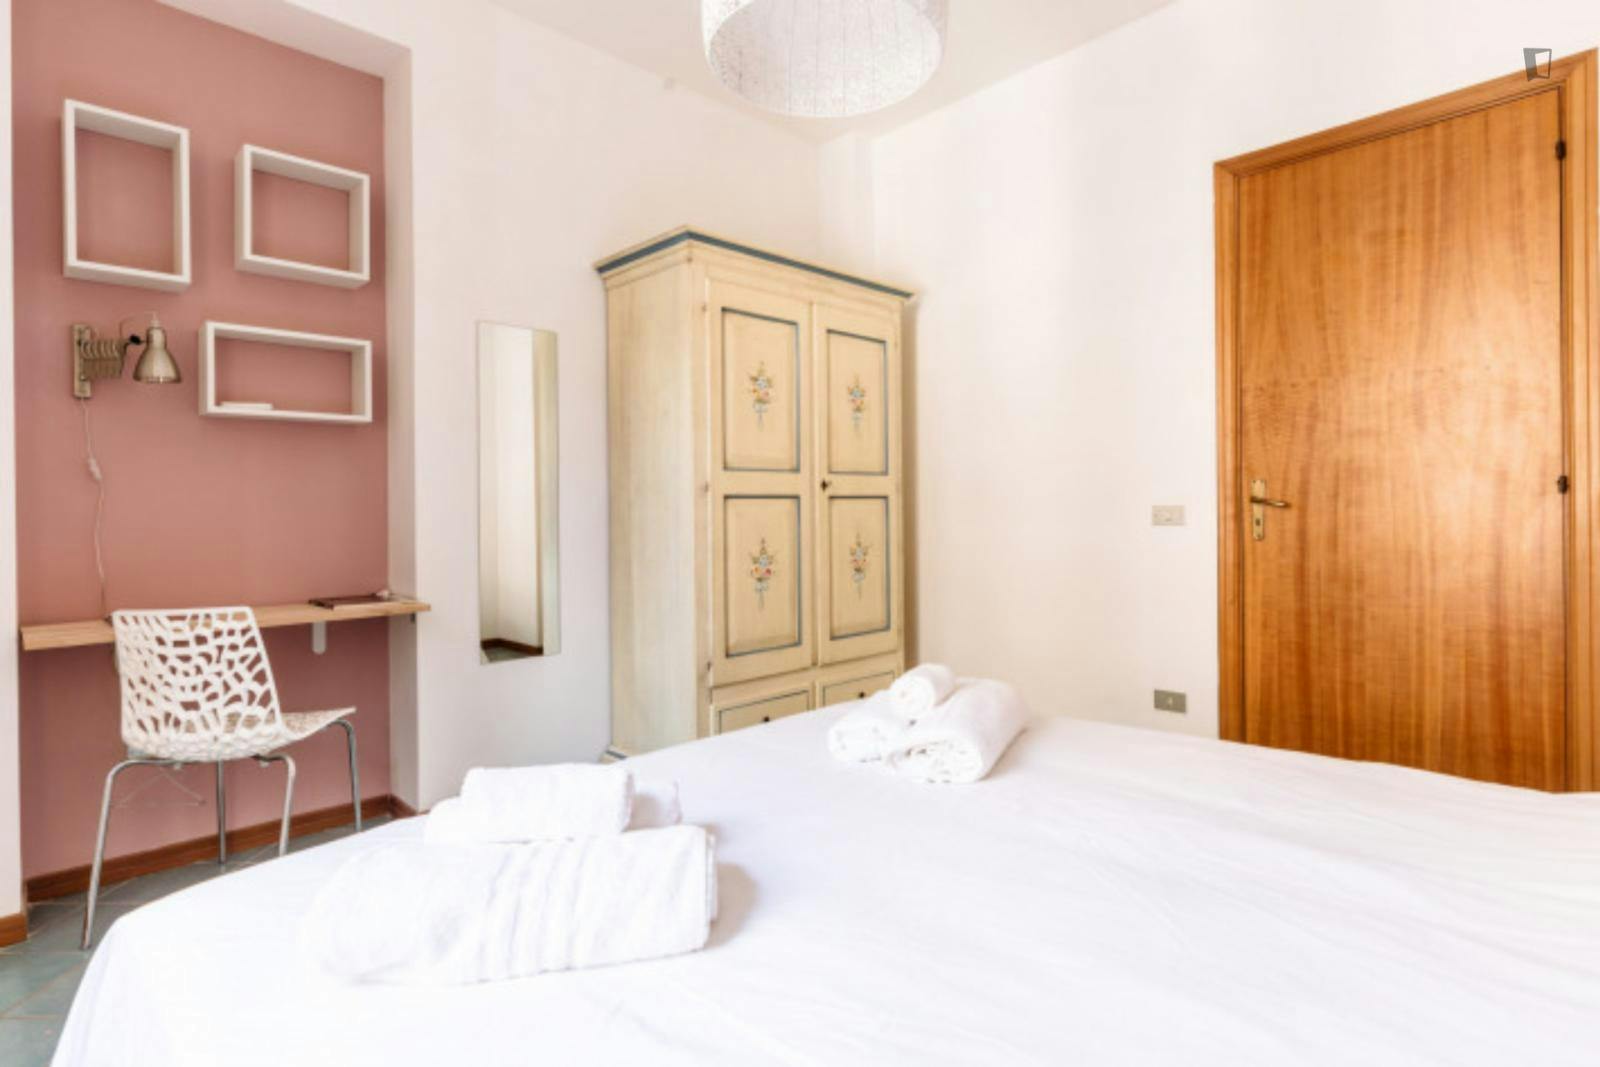 Charming 2-bedroom apartment with balcony close to Palermo Lolli train station